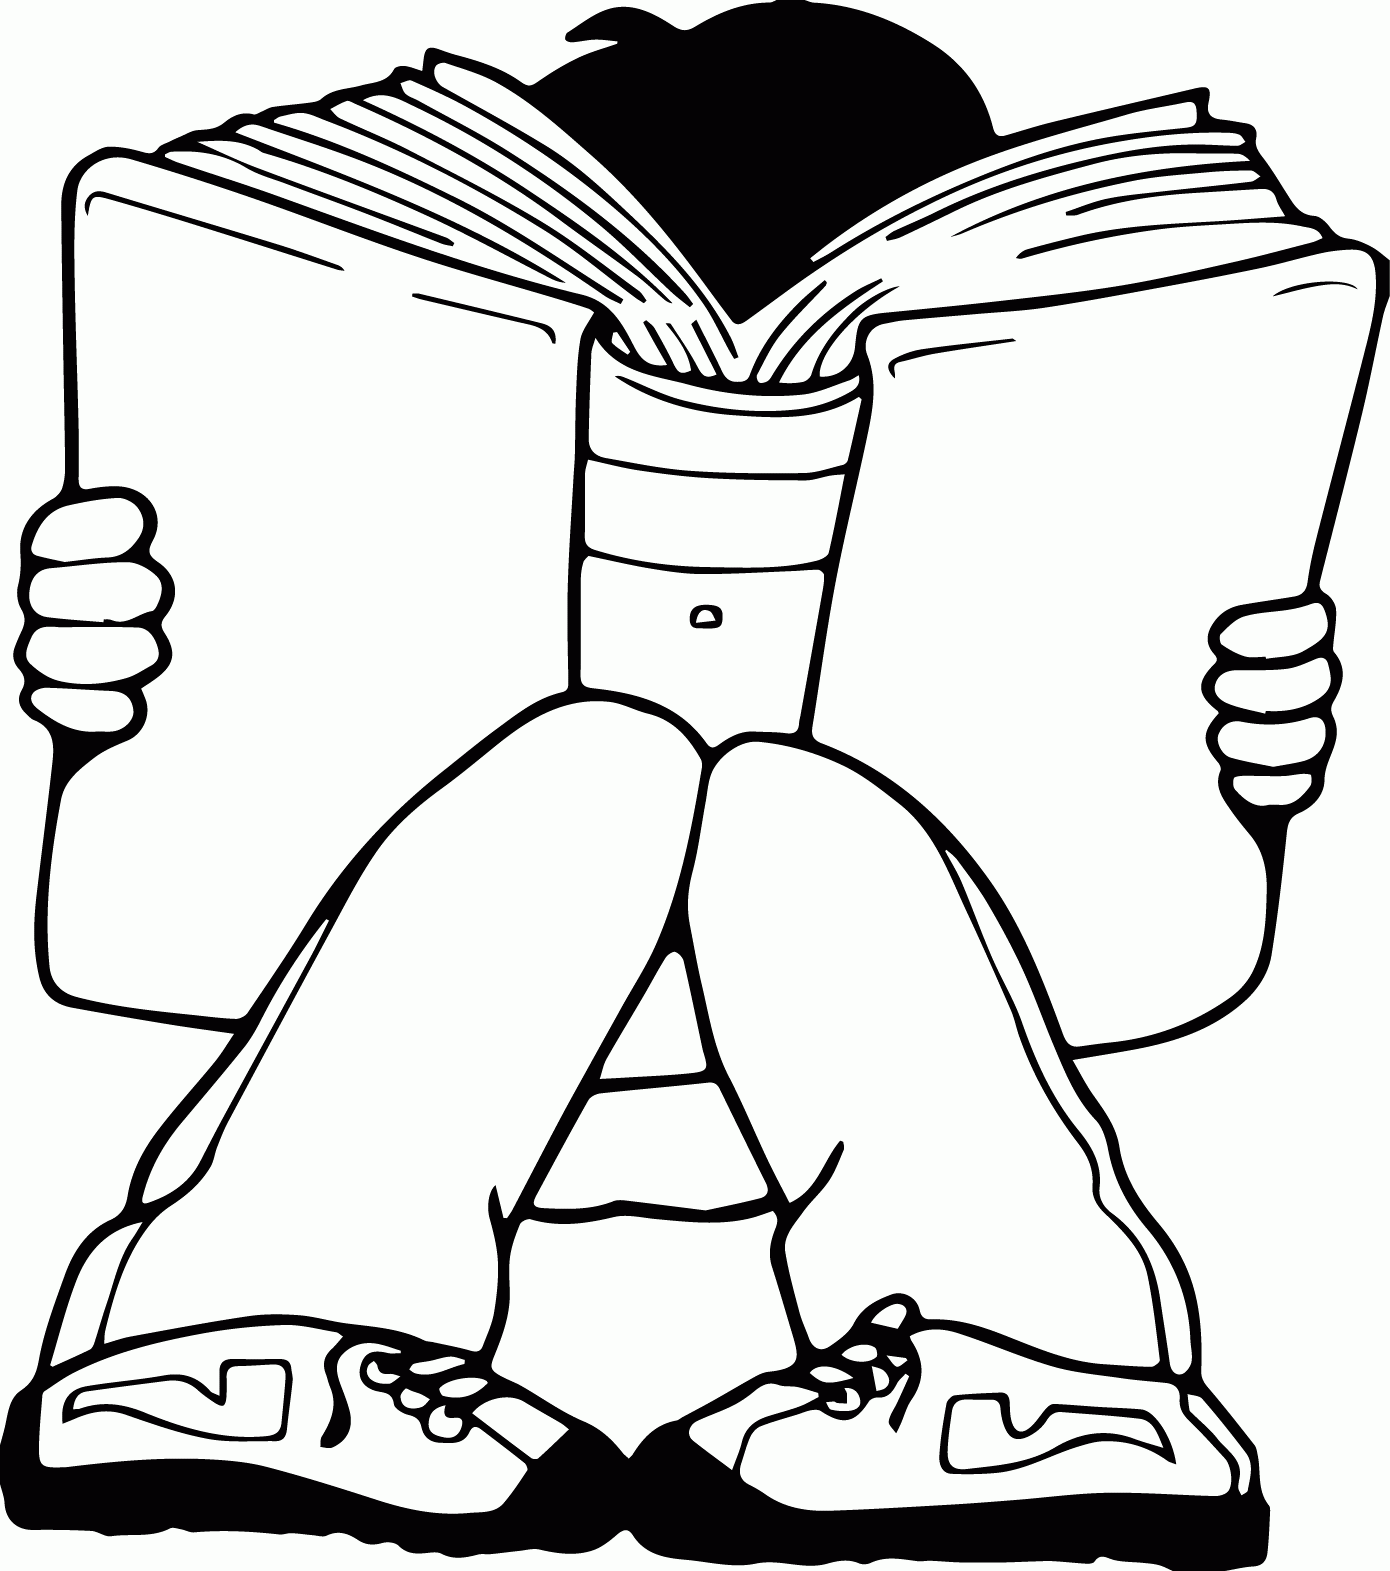 Read A Book Coloring Page - Coloring Home